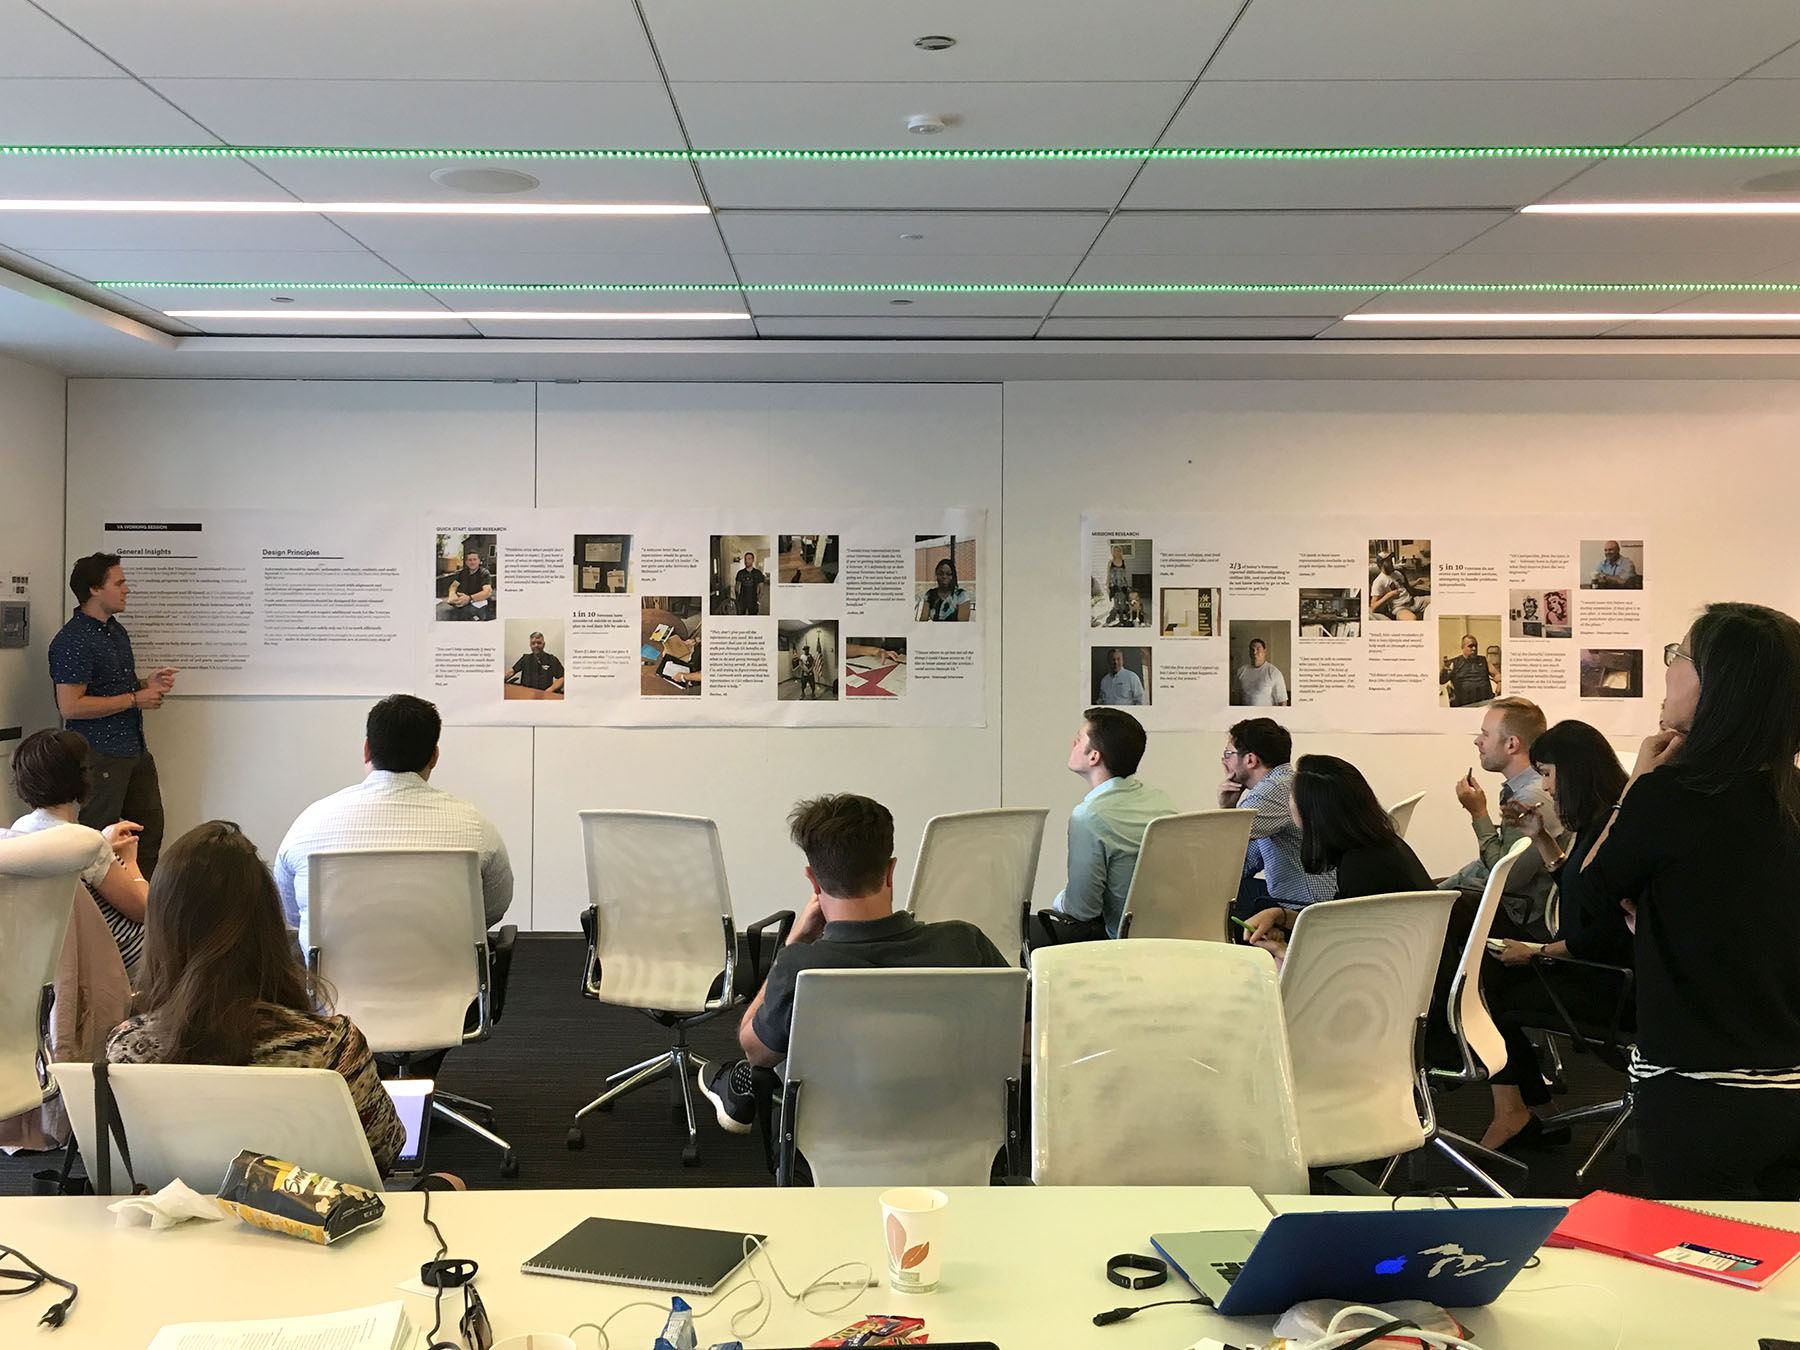 A group of people sit in an office watching a presenter discuss several large posters of research materials on the wall.